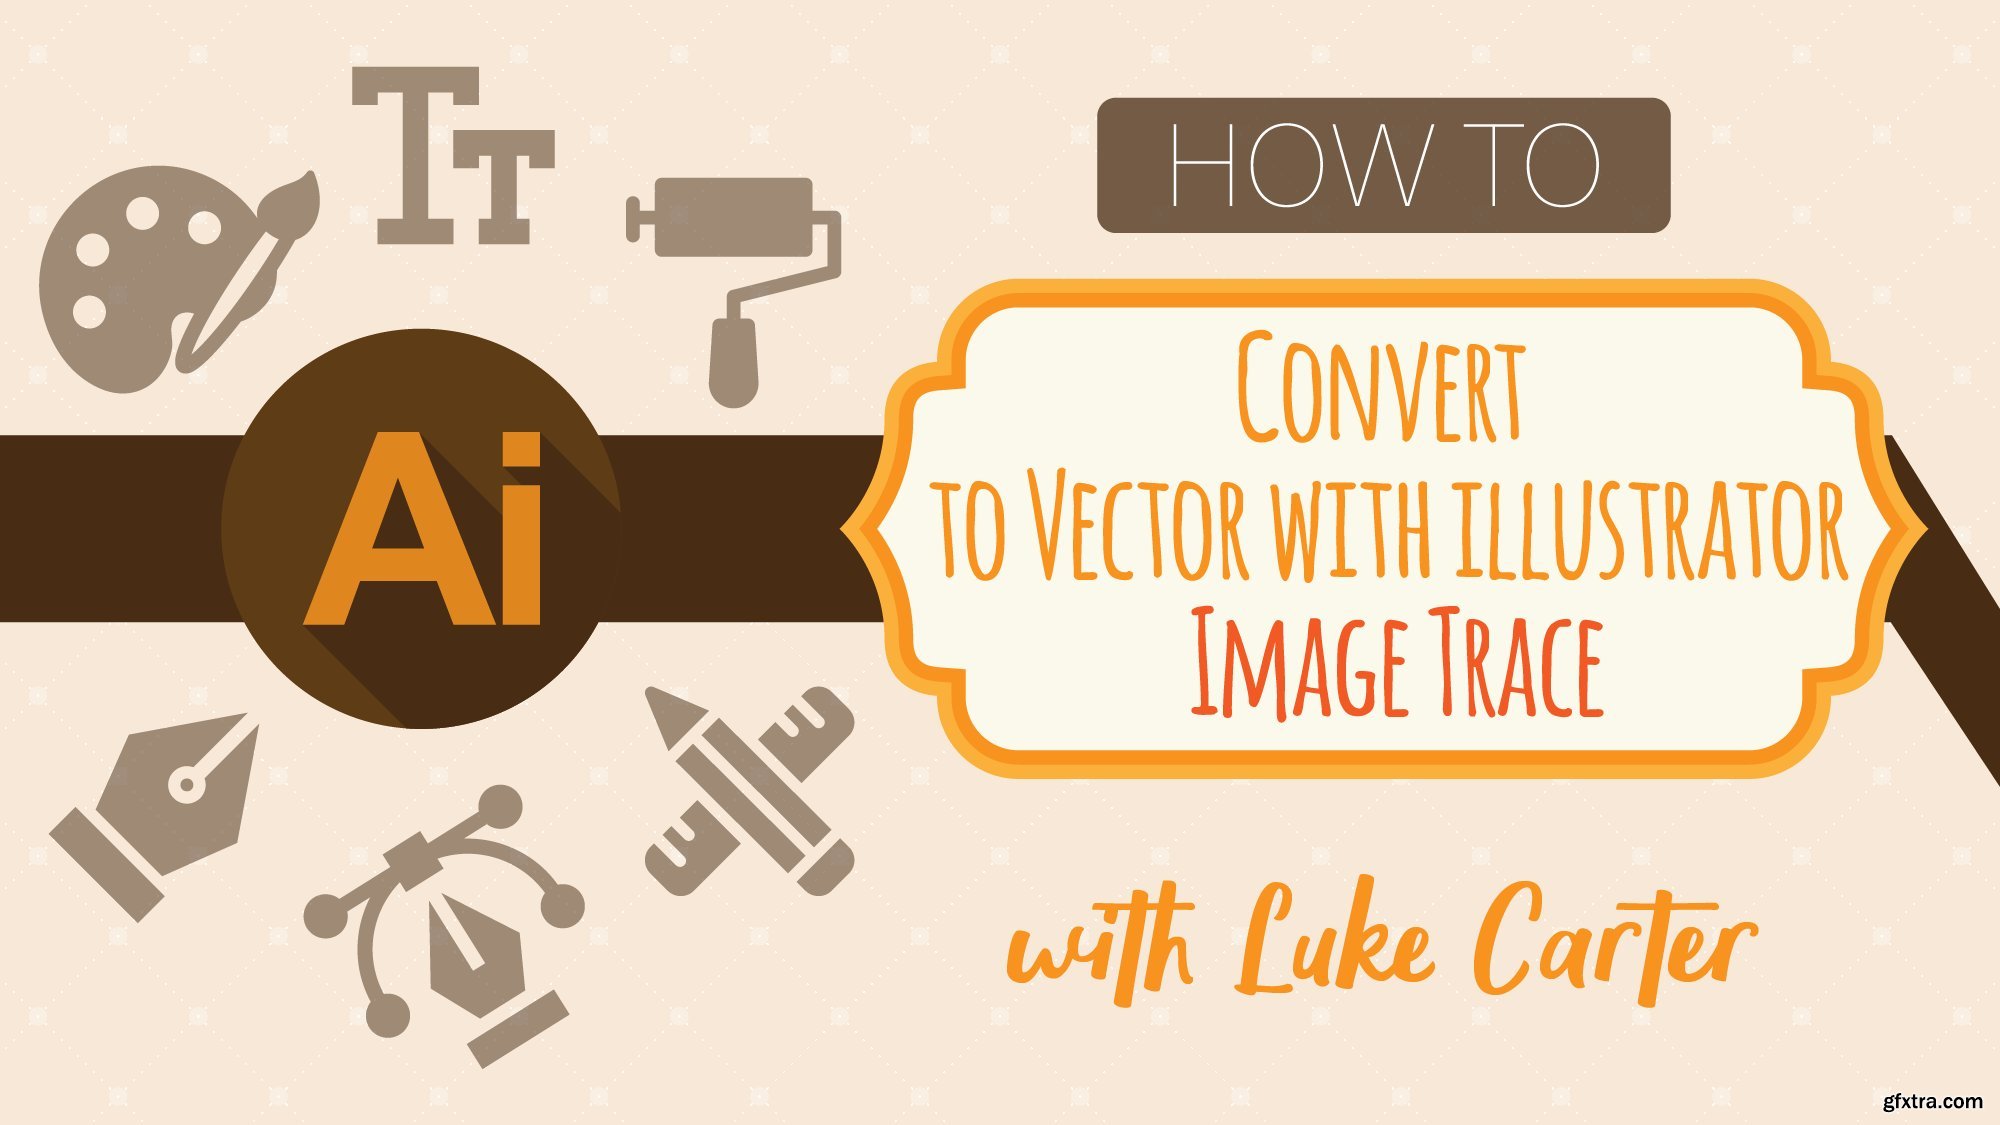 Convert a Drawing or Image to Vector with Illustrator Image Trace » GFxtra